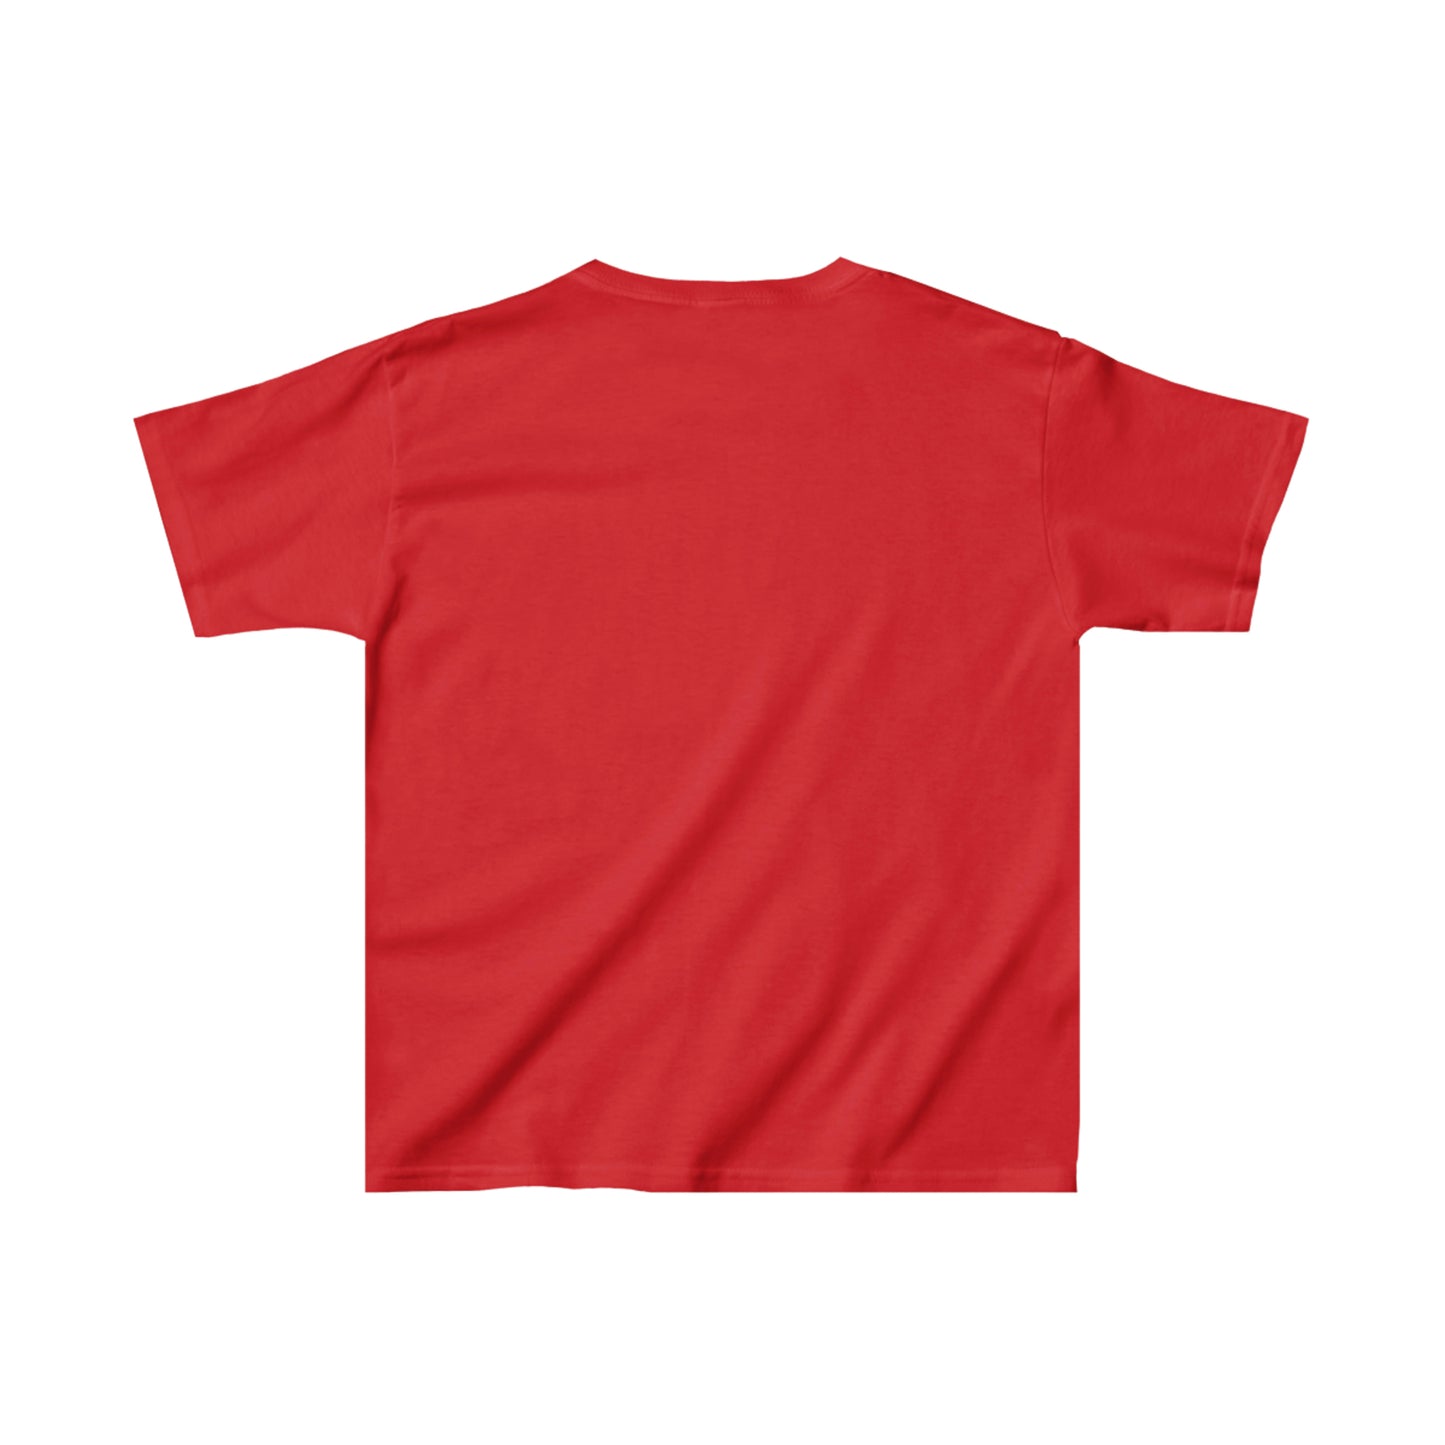 Angel of the universe Kids Heavy Cotton™ Tee